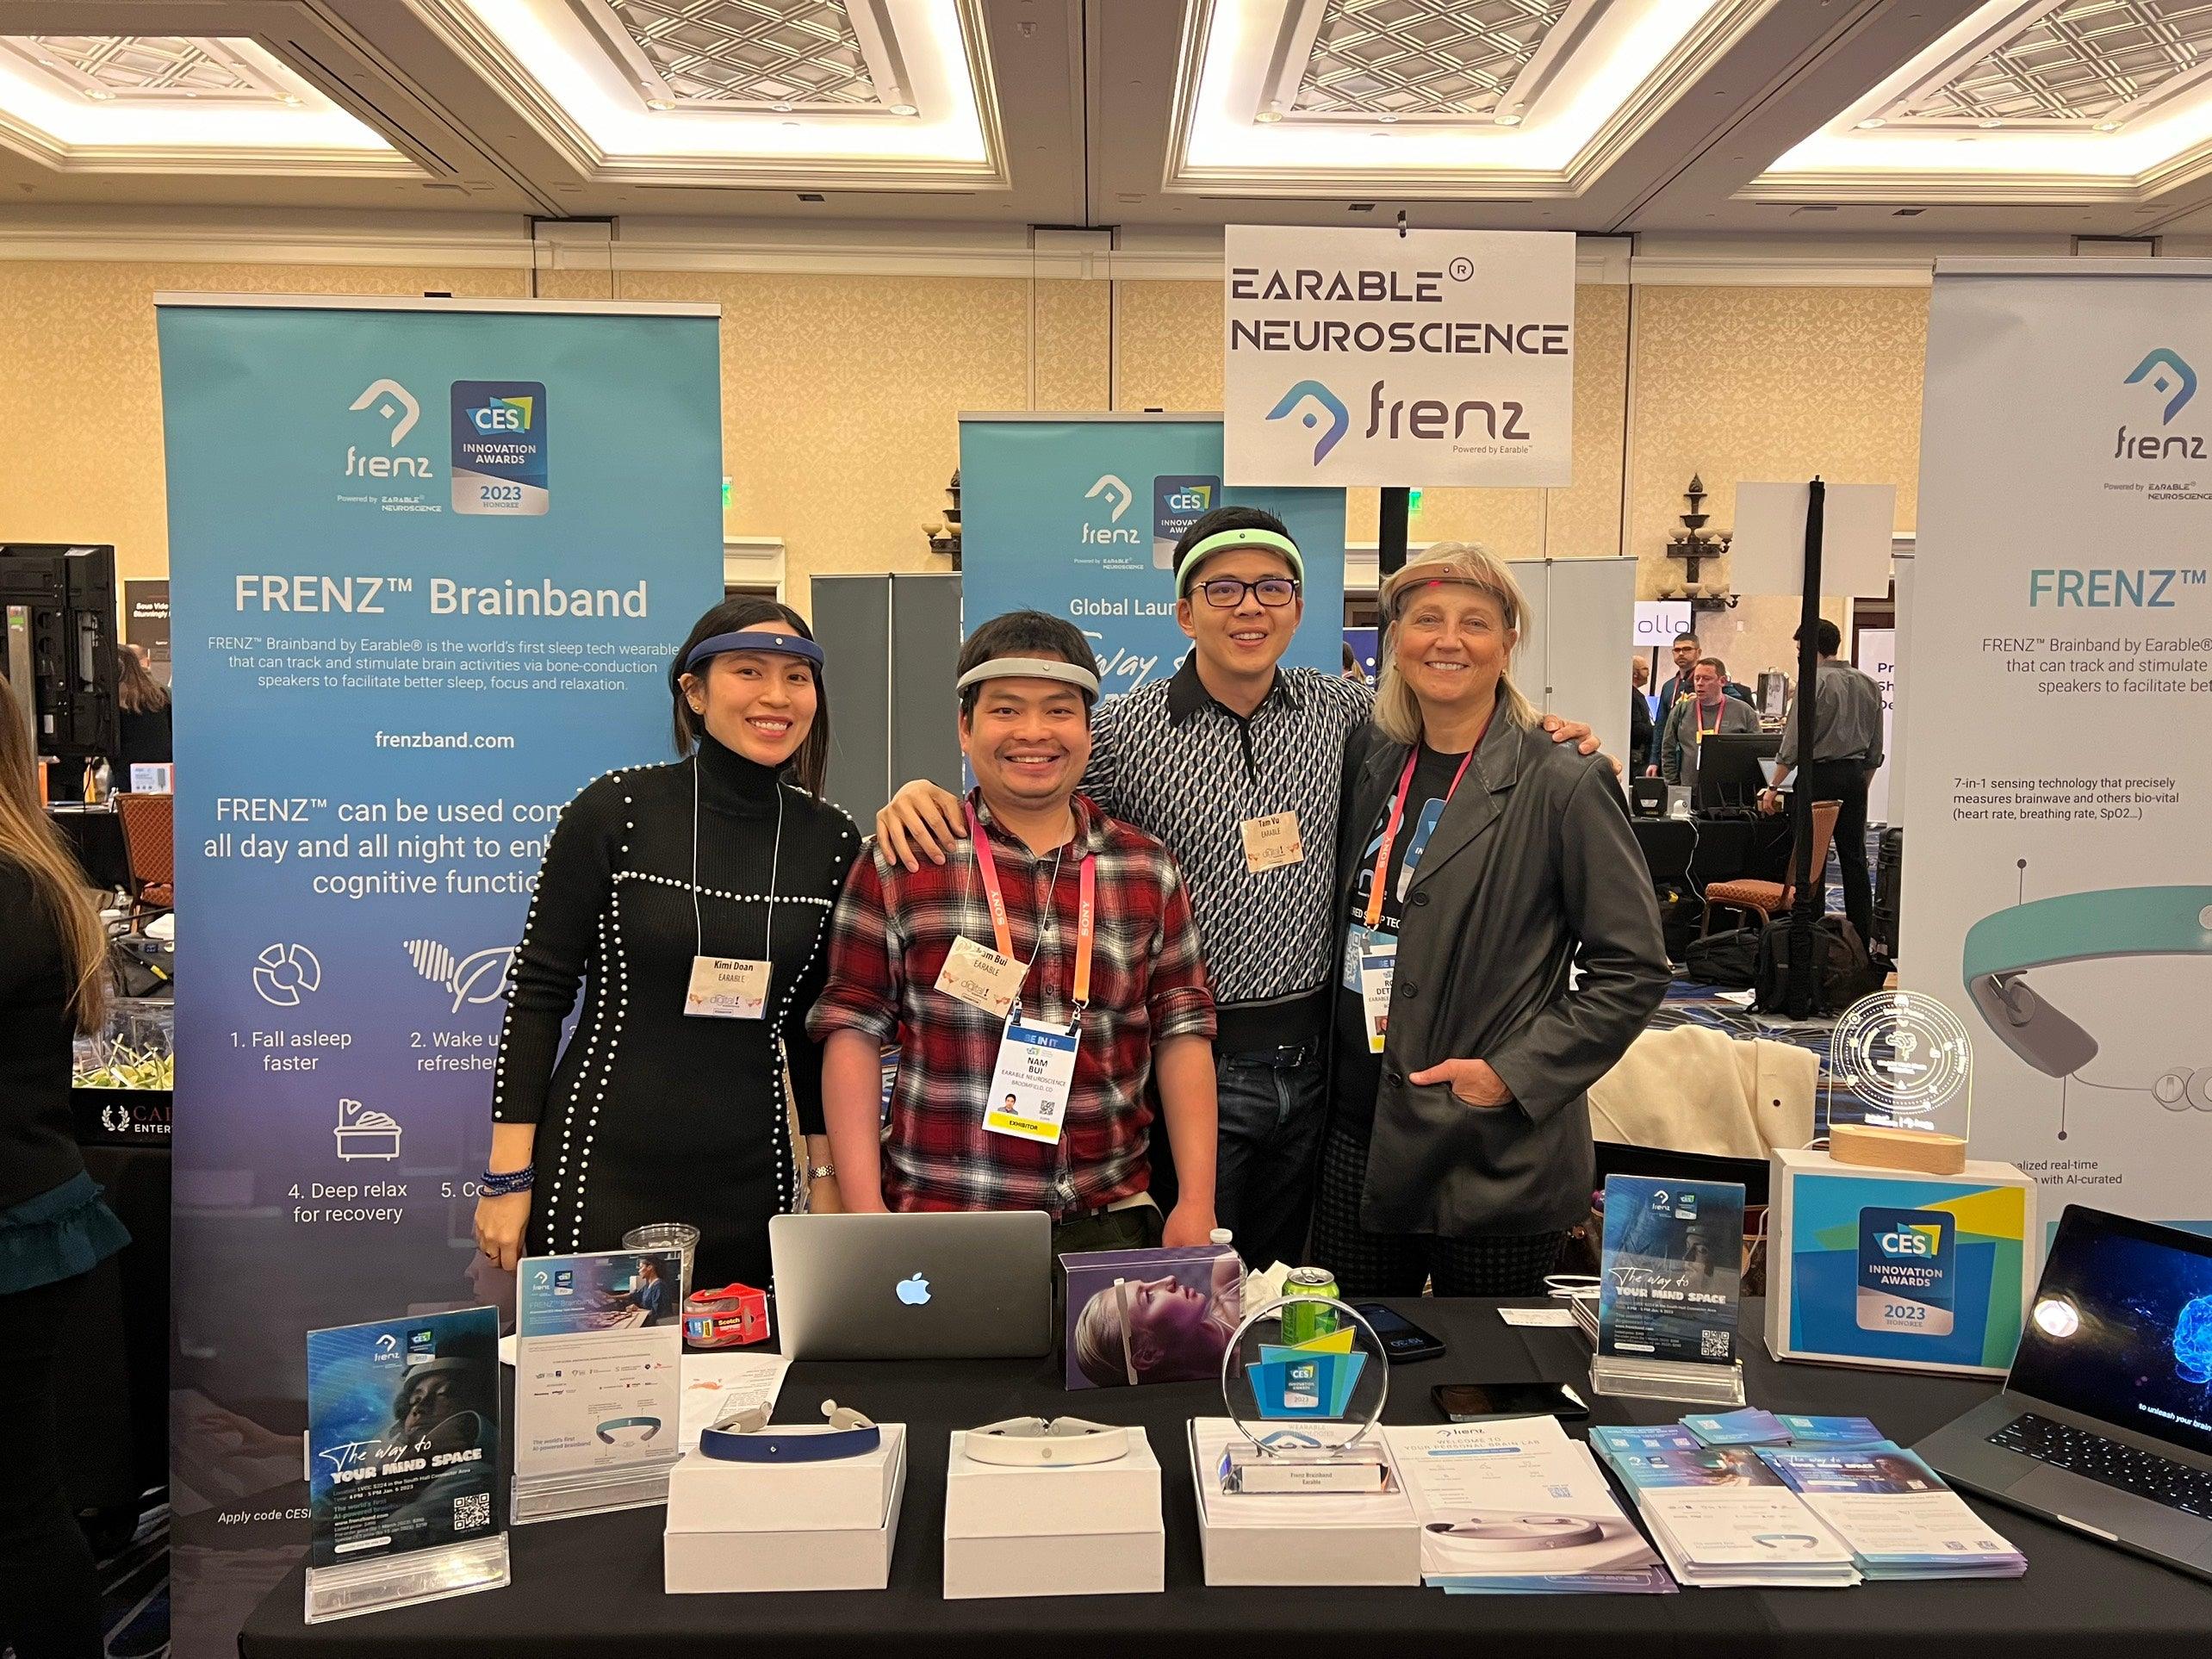 A Look Back at the FRENZ™ Global Launch at CES 2023 - FRENZ™ by Earable® Neuroscience